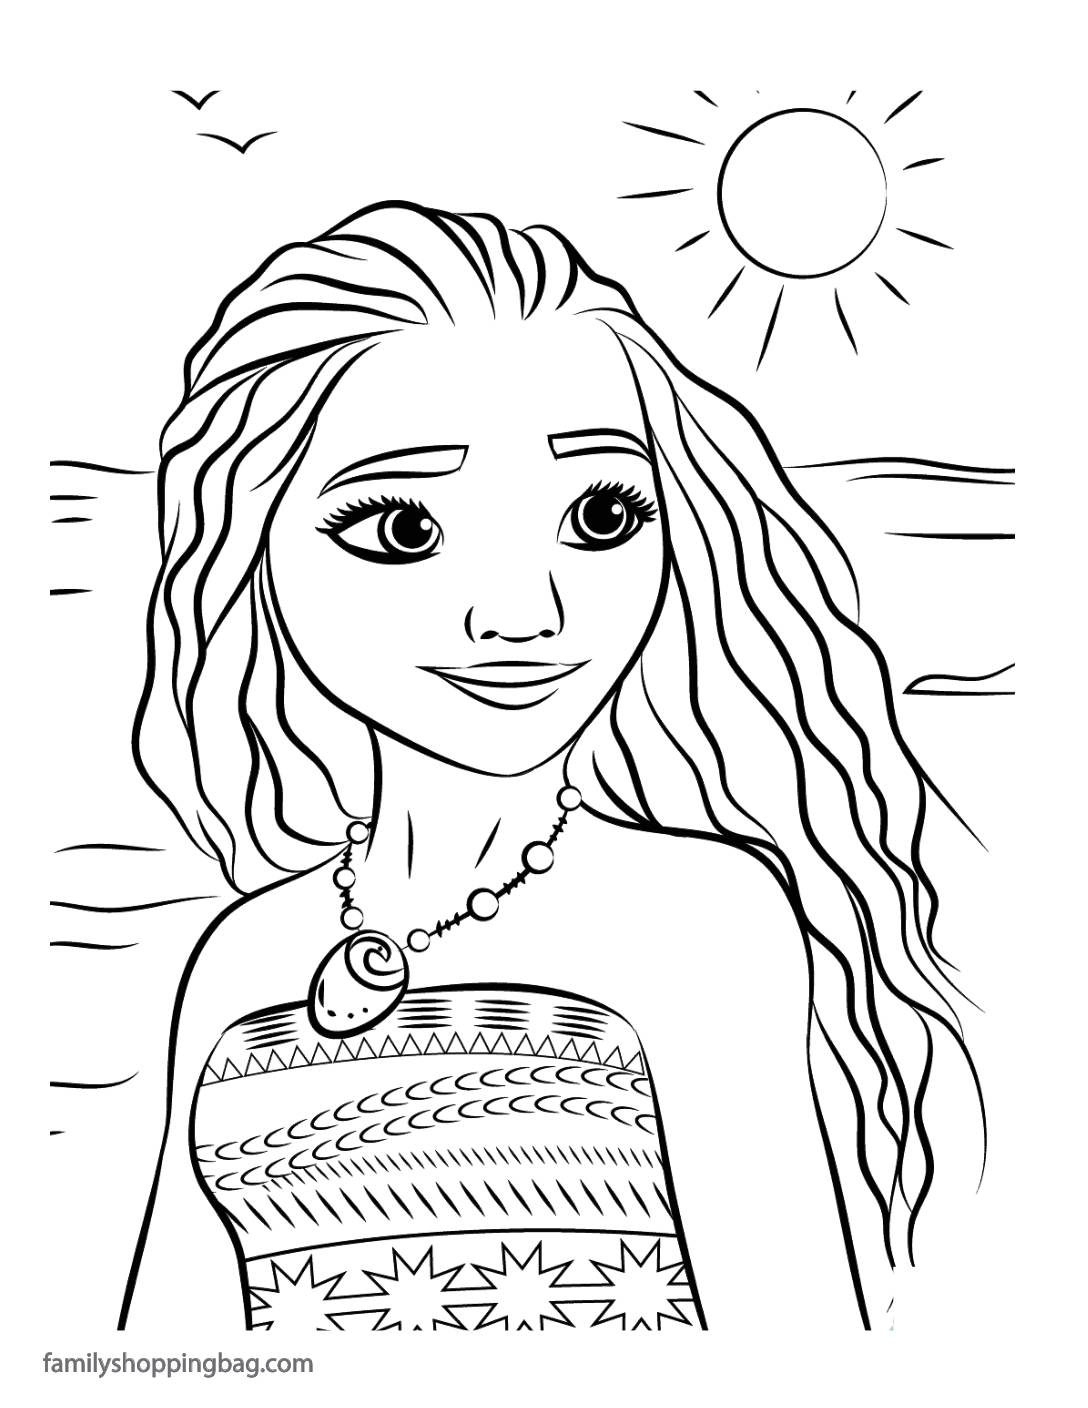 Coloring Page 5 Moana Coloring Pages